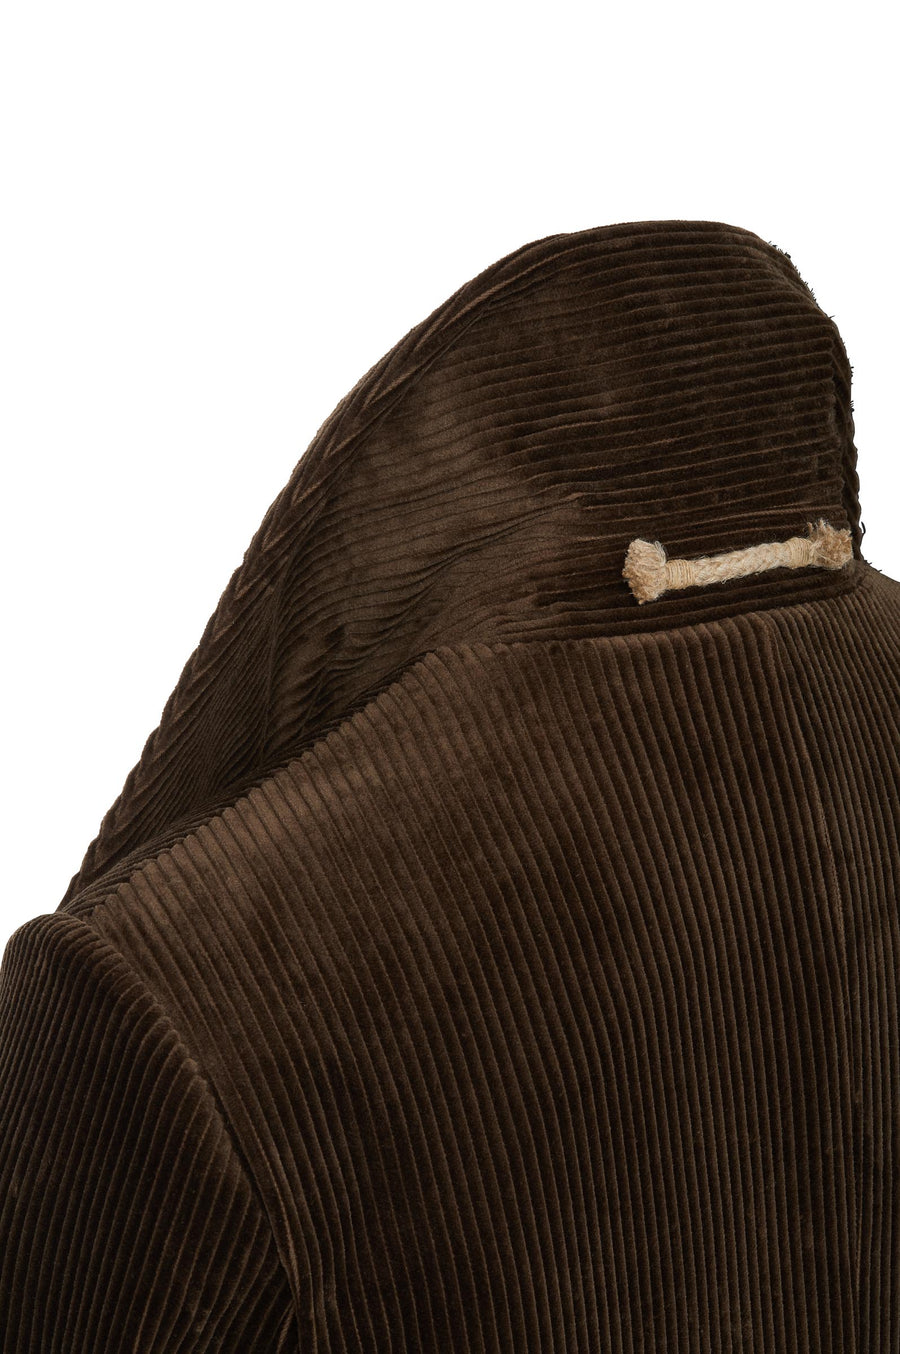 Big collar on men's corduroy jacket brown with black and white lining made of wool and cotton.